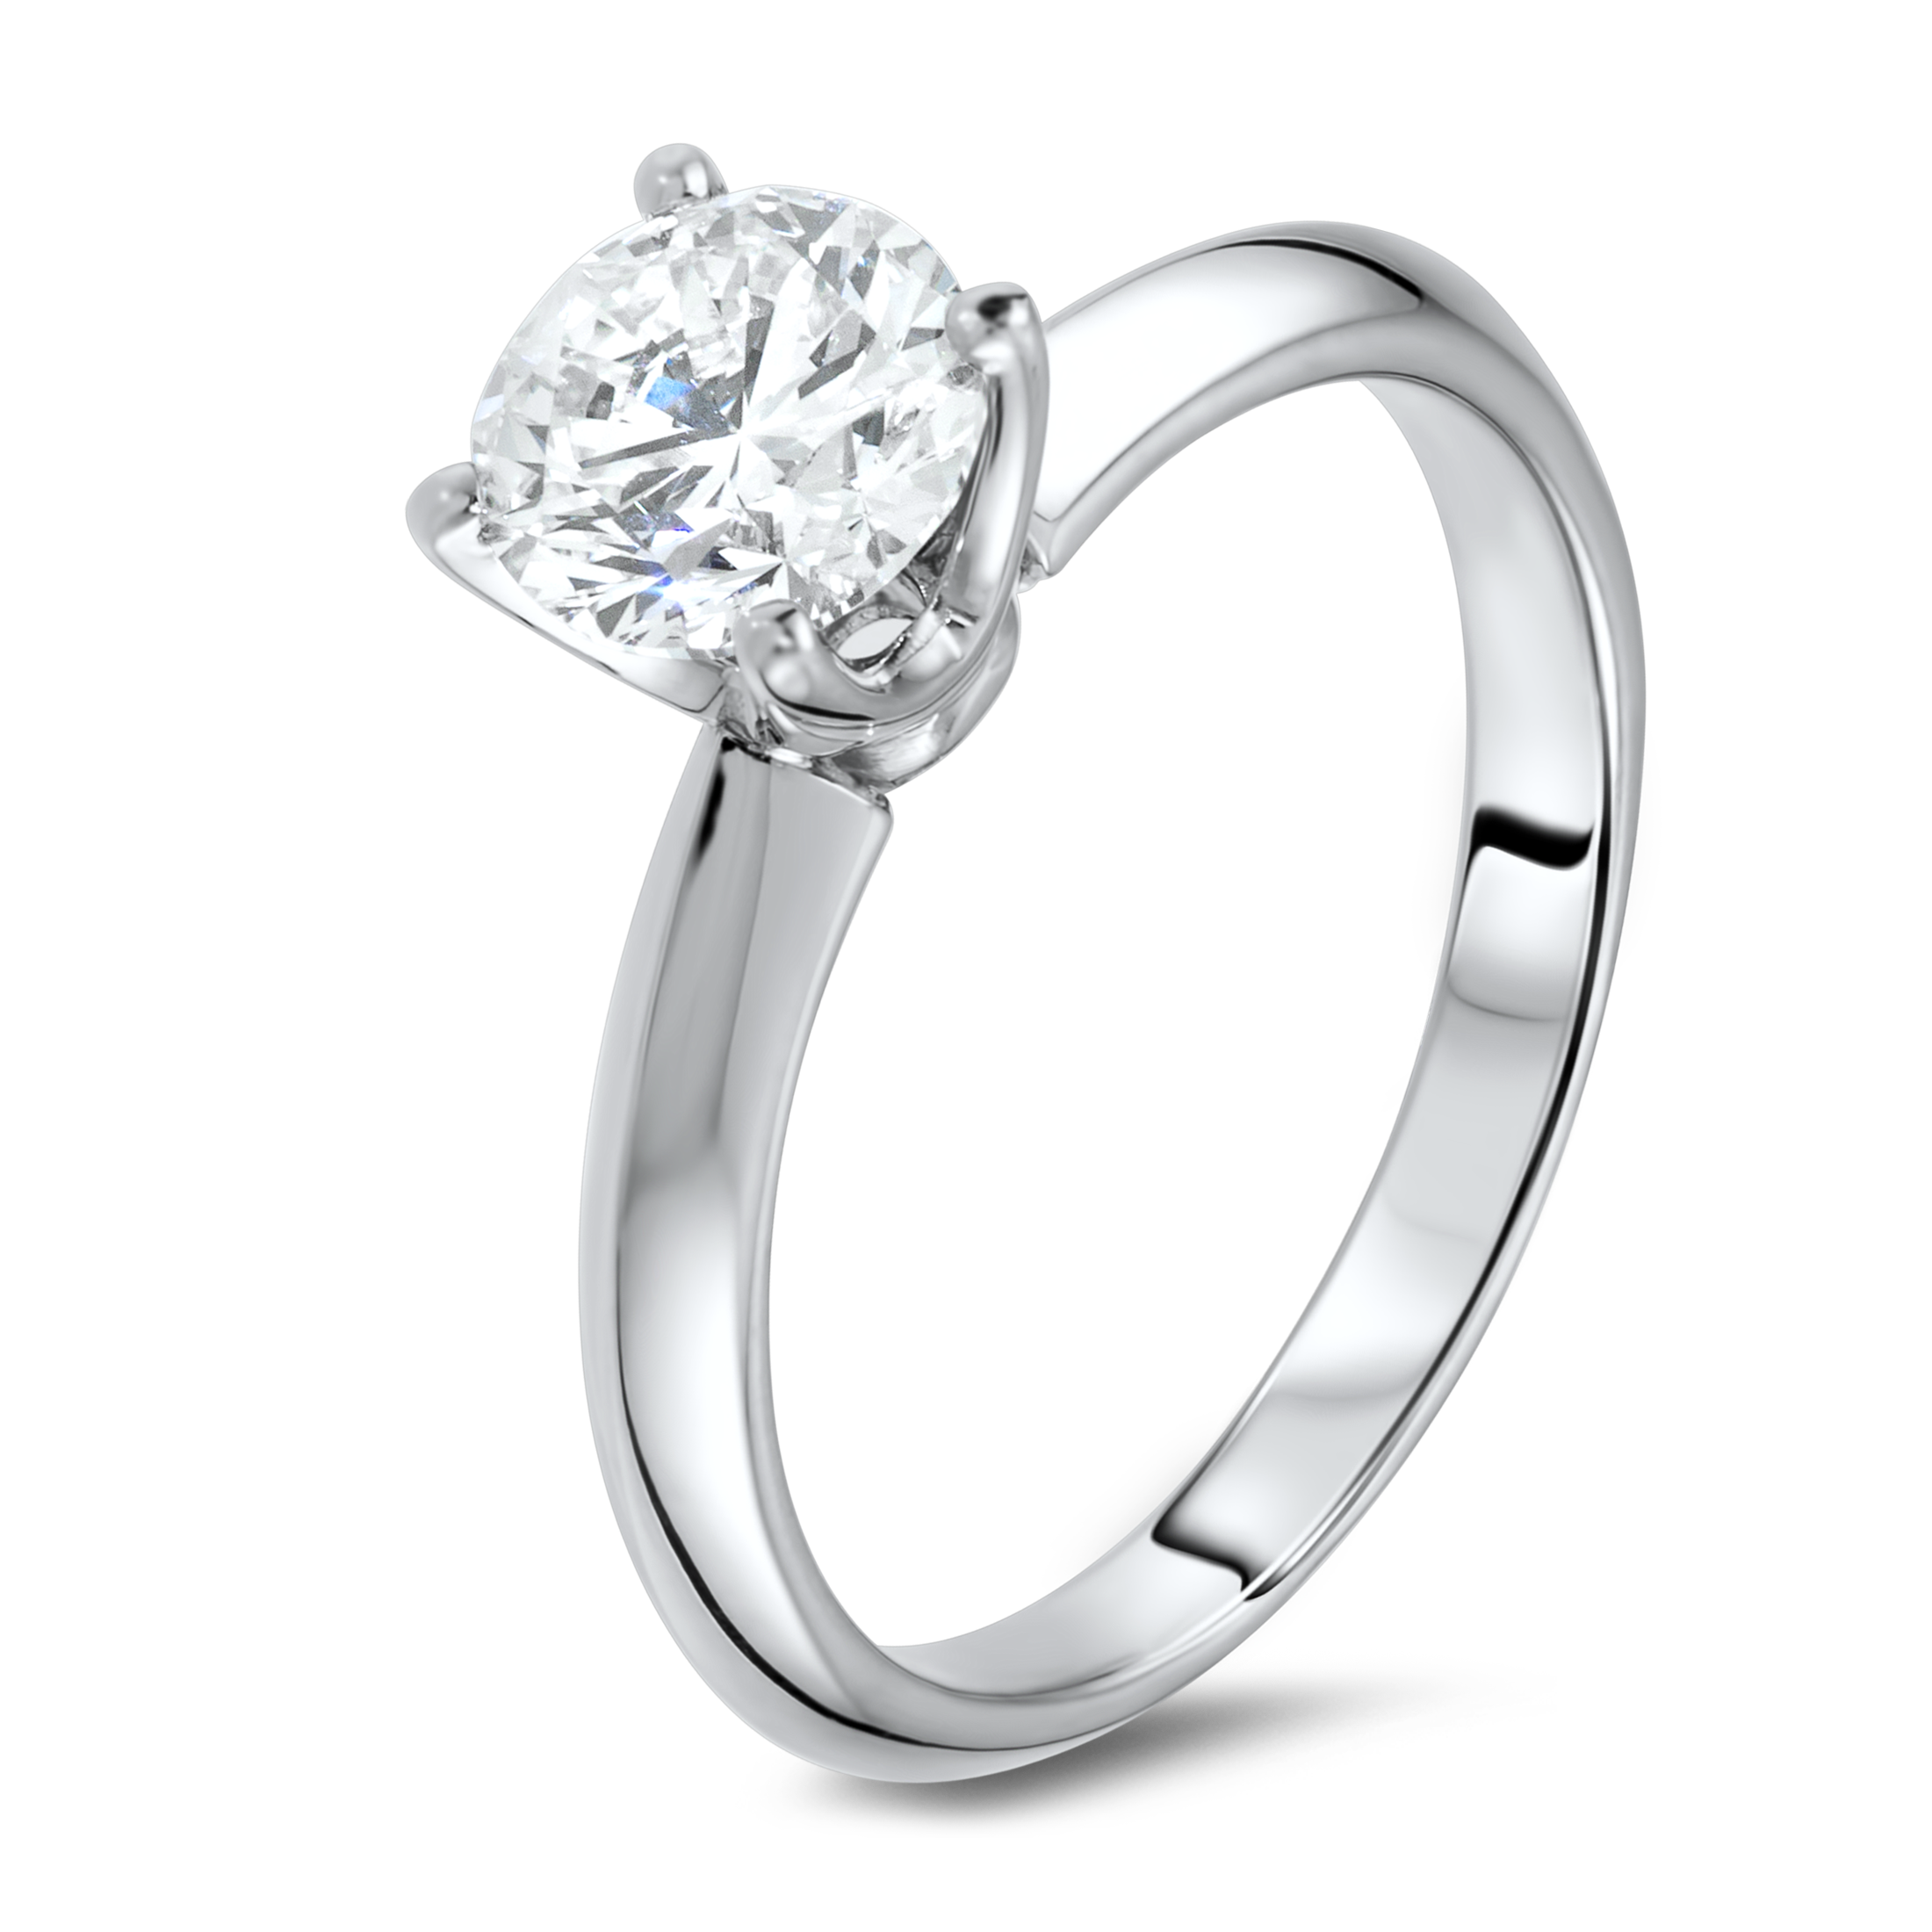 Jewelry ring PNG images free download.